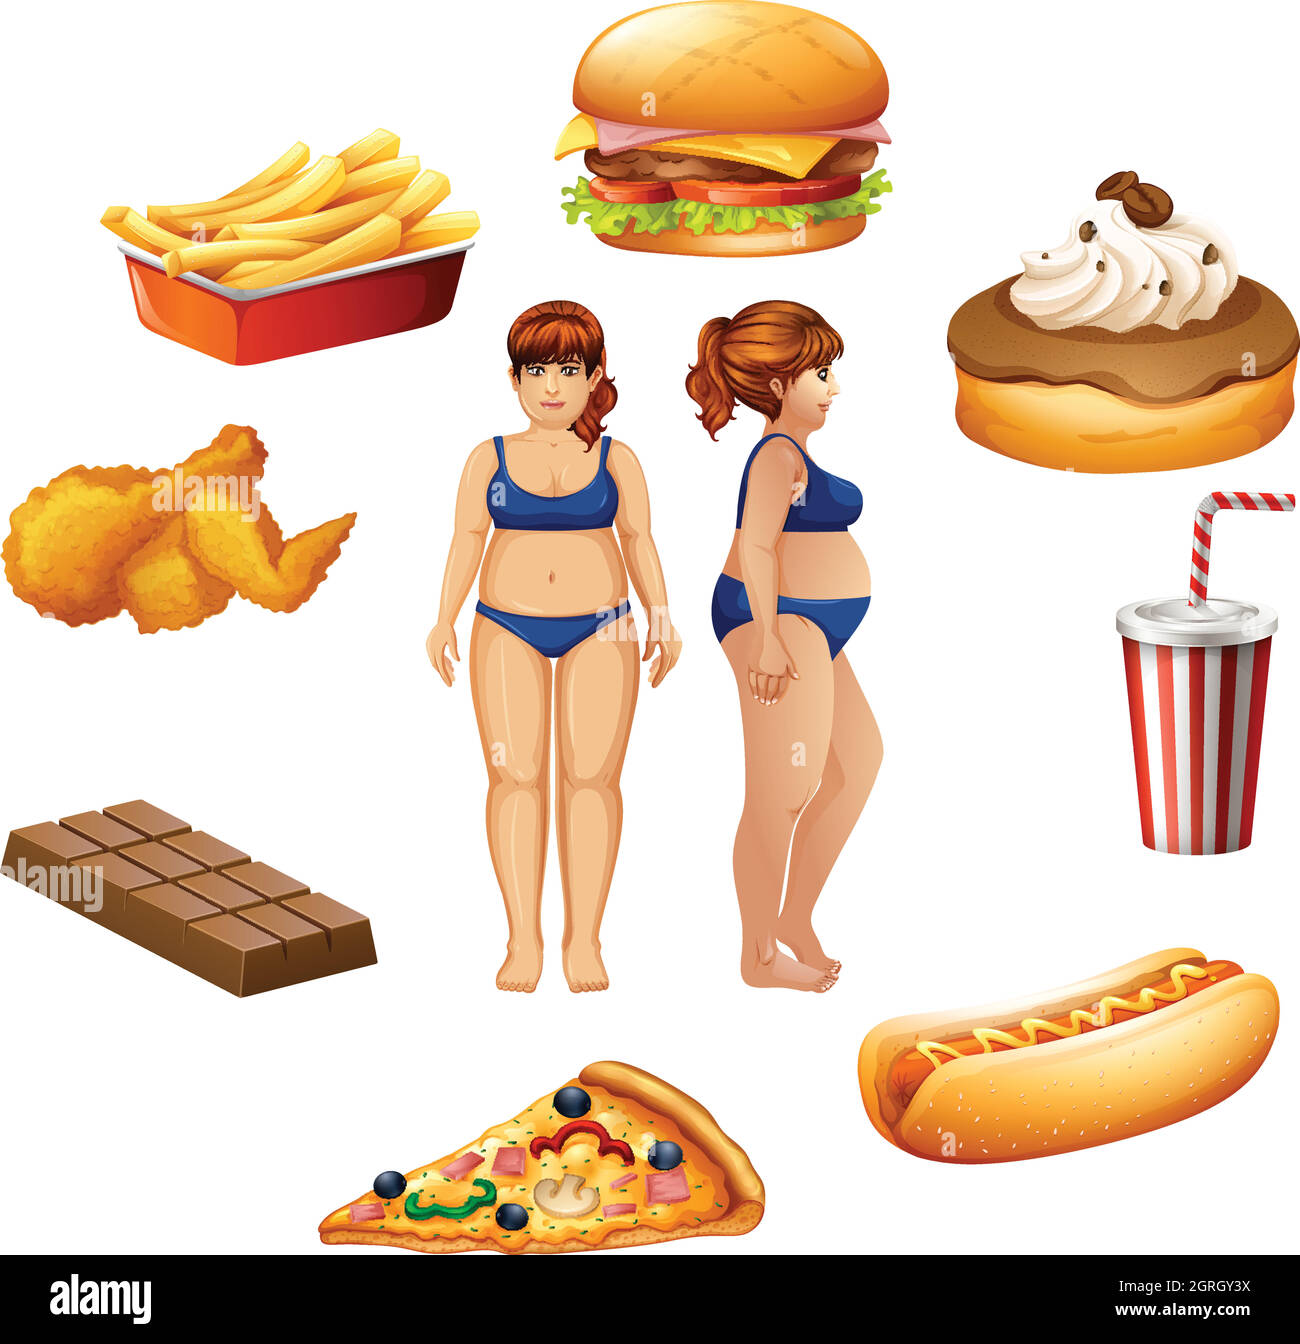 Overweight women with unhealthy food Stock Vector